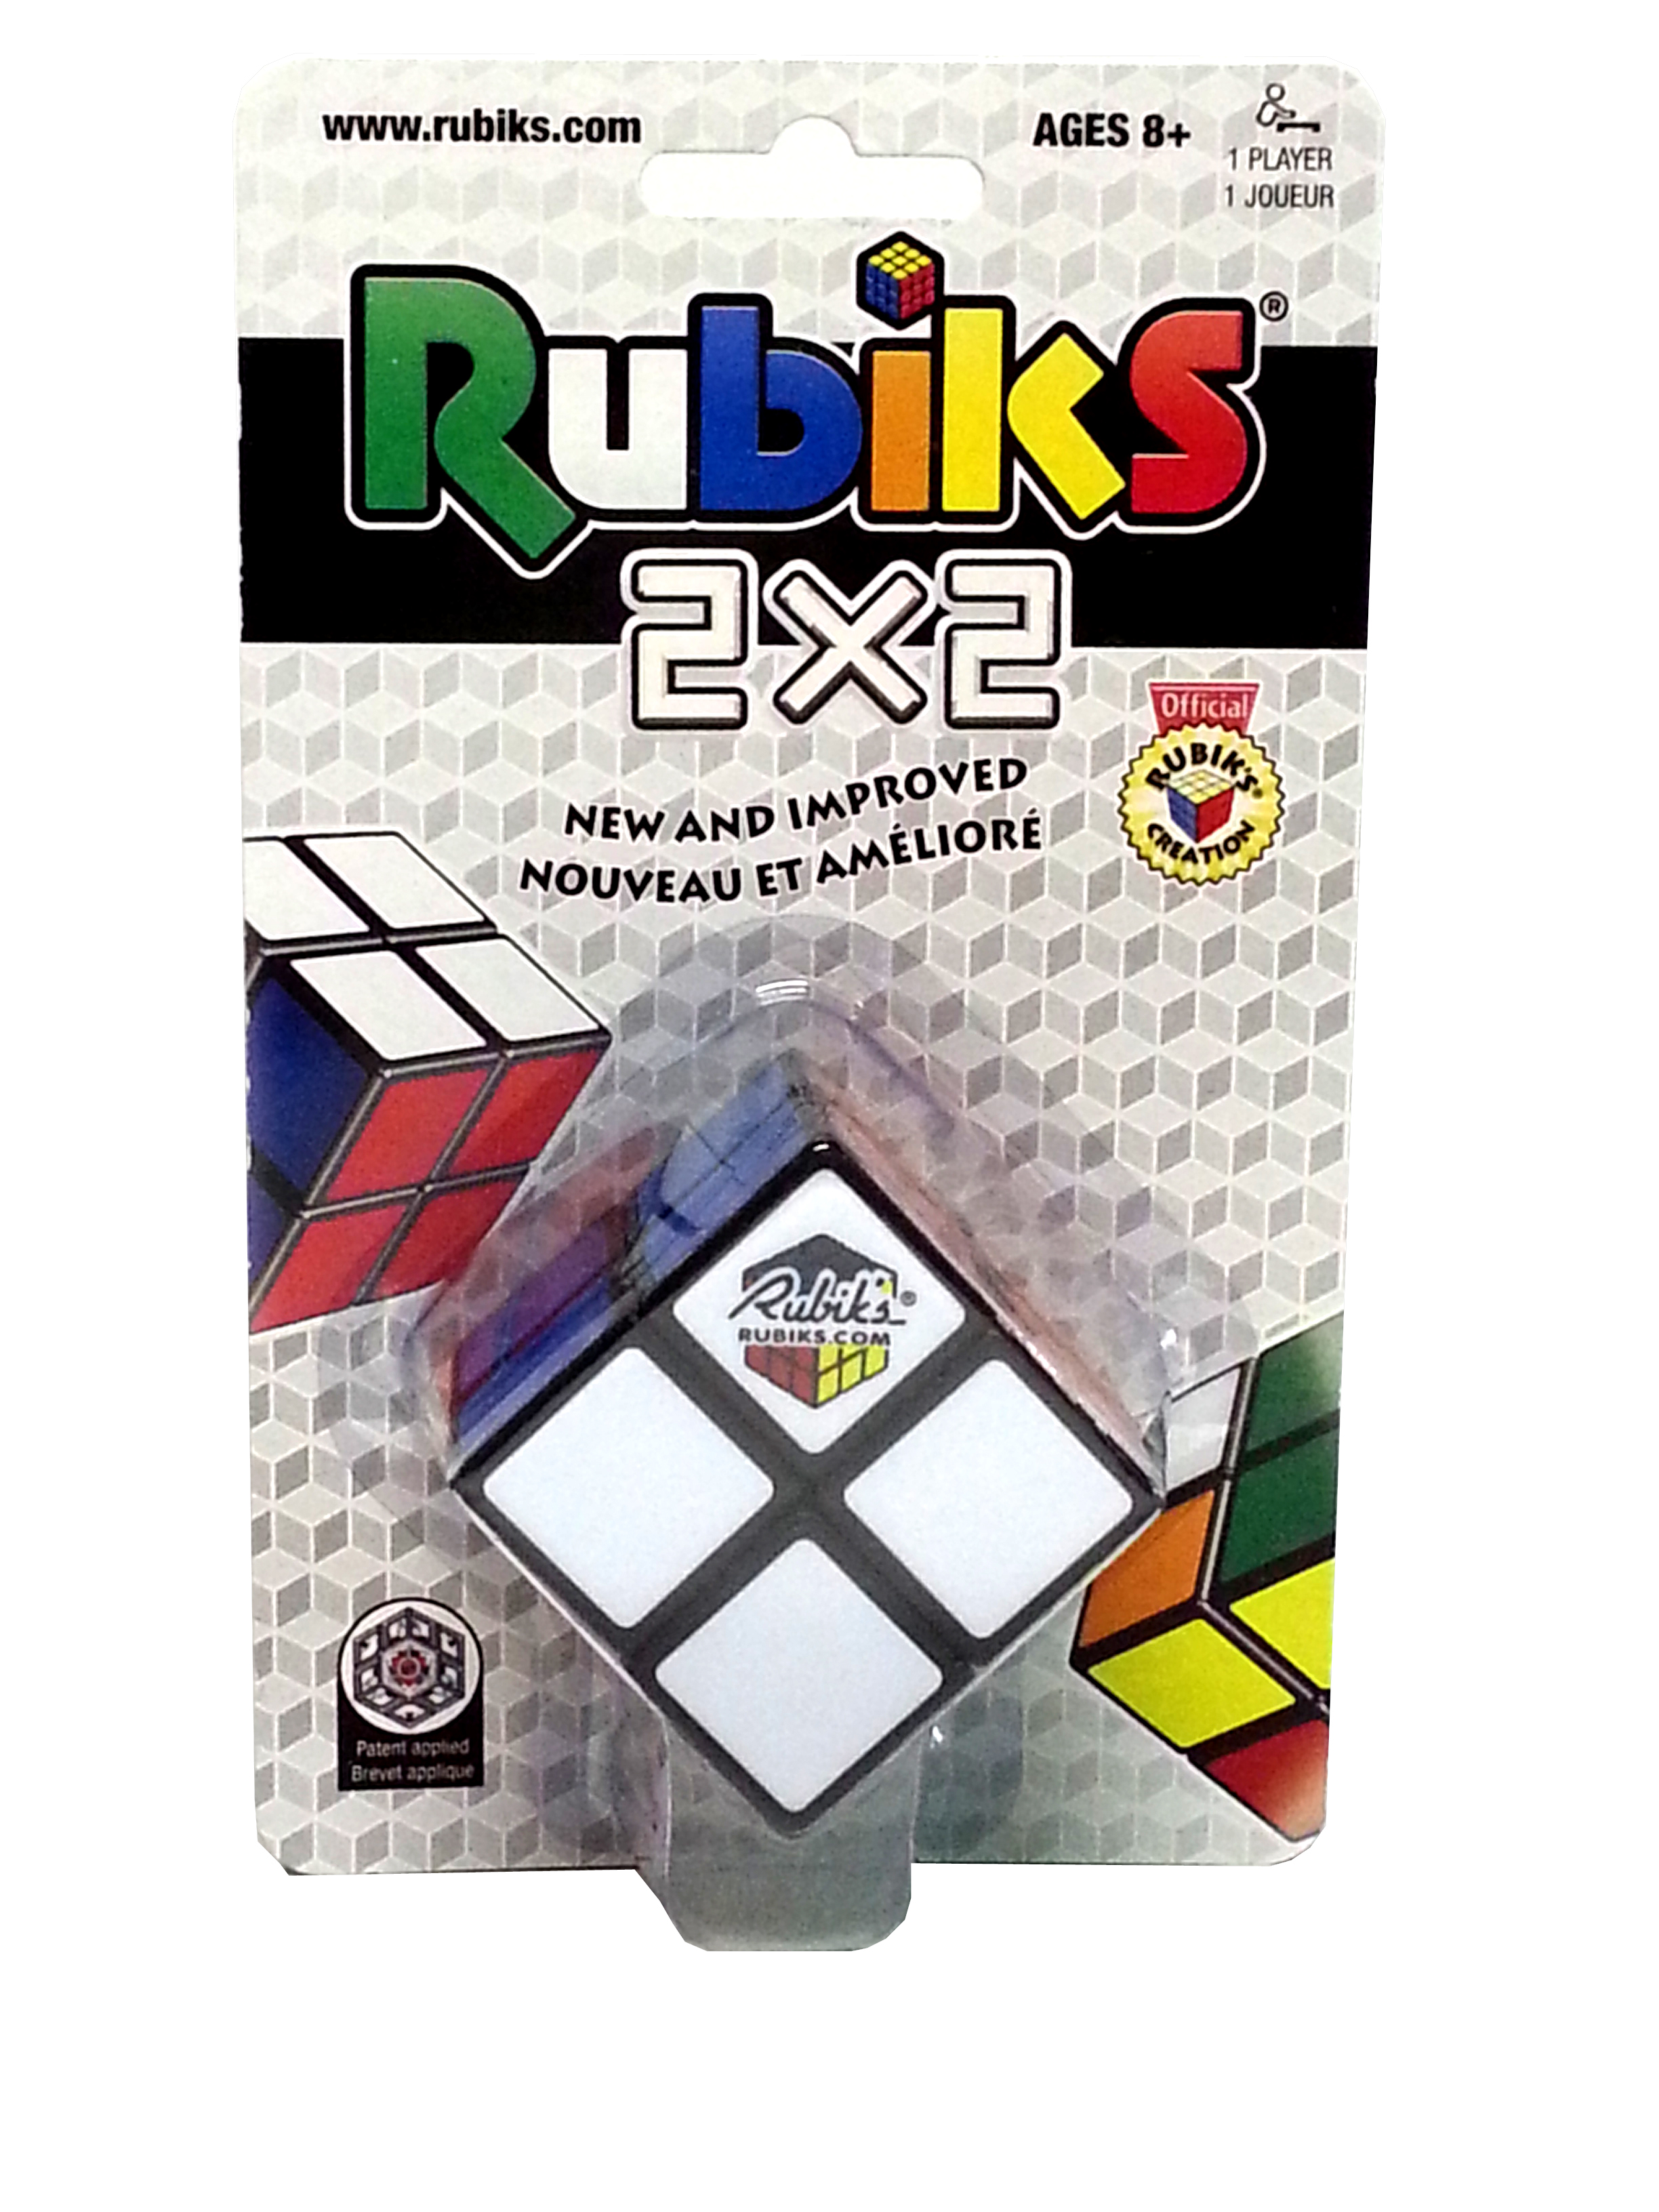 Rubiks 2X2 Cube By Winning Moves 5007 Rubiks 2X2x2 Puzzle Toy Play Winning Mov 